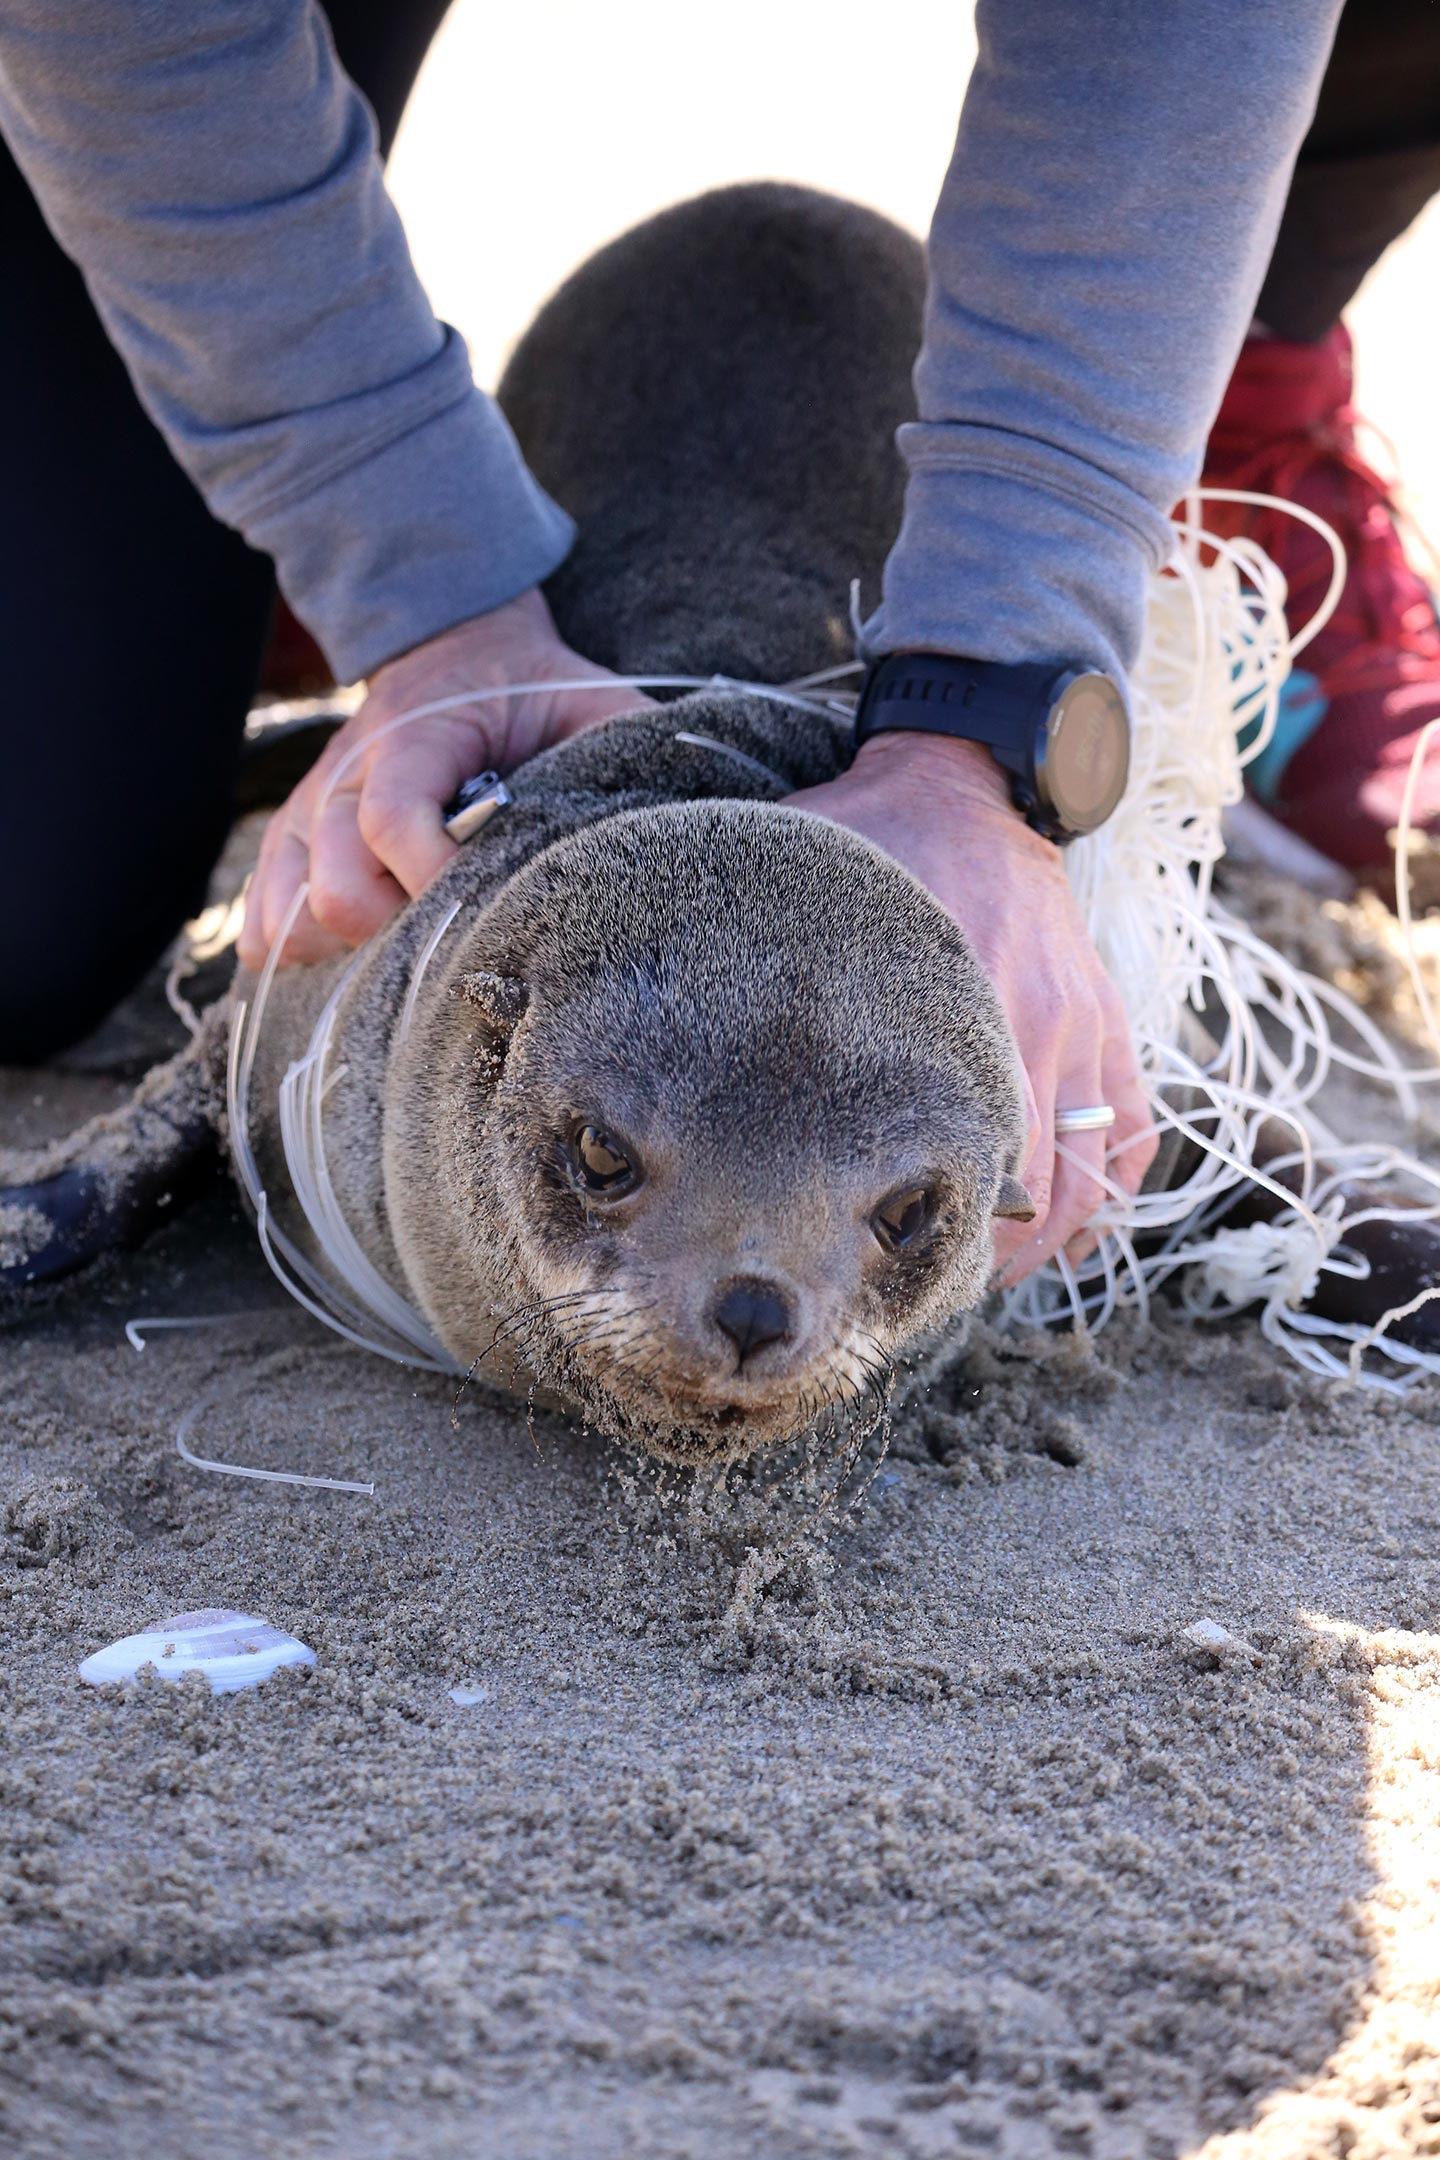 Hundreds of Cape Fur Seals Entangled in Fishing Lines and Nets Every Year –  Causing Horrific Injuries and Painful Deaths